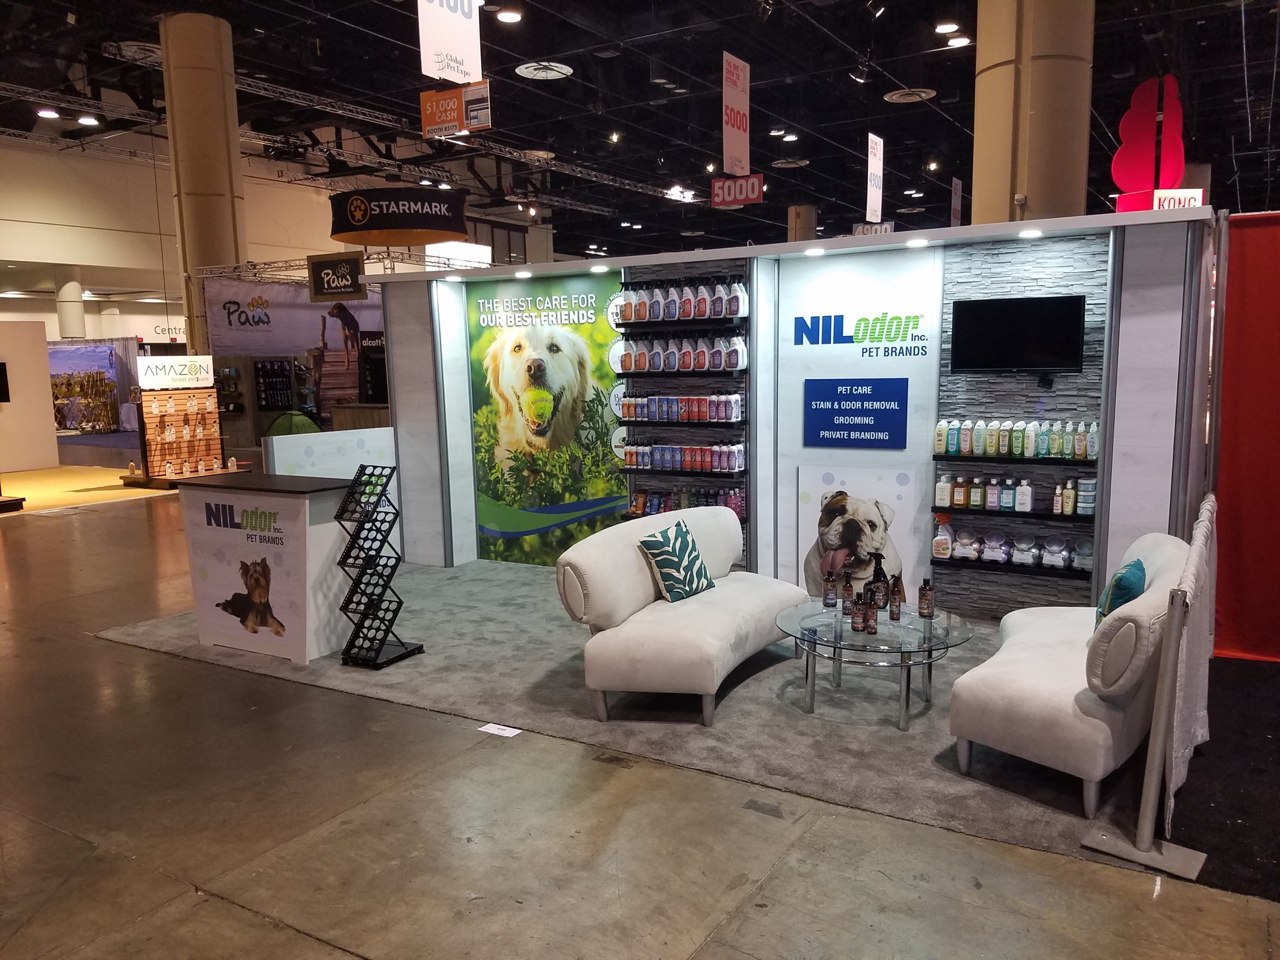 Example of Well Designed Graphics and Product Displays on a Trade Show Exhibit